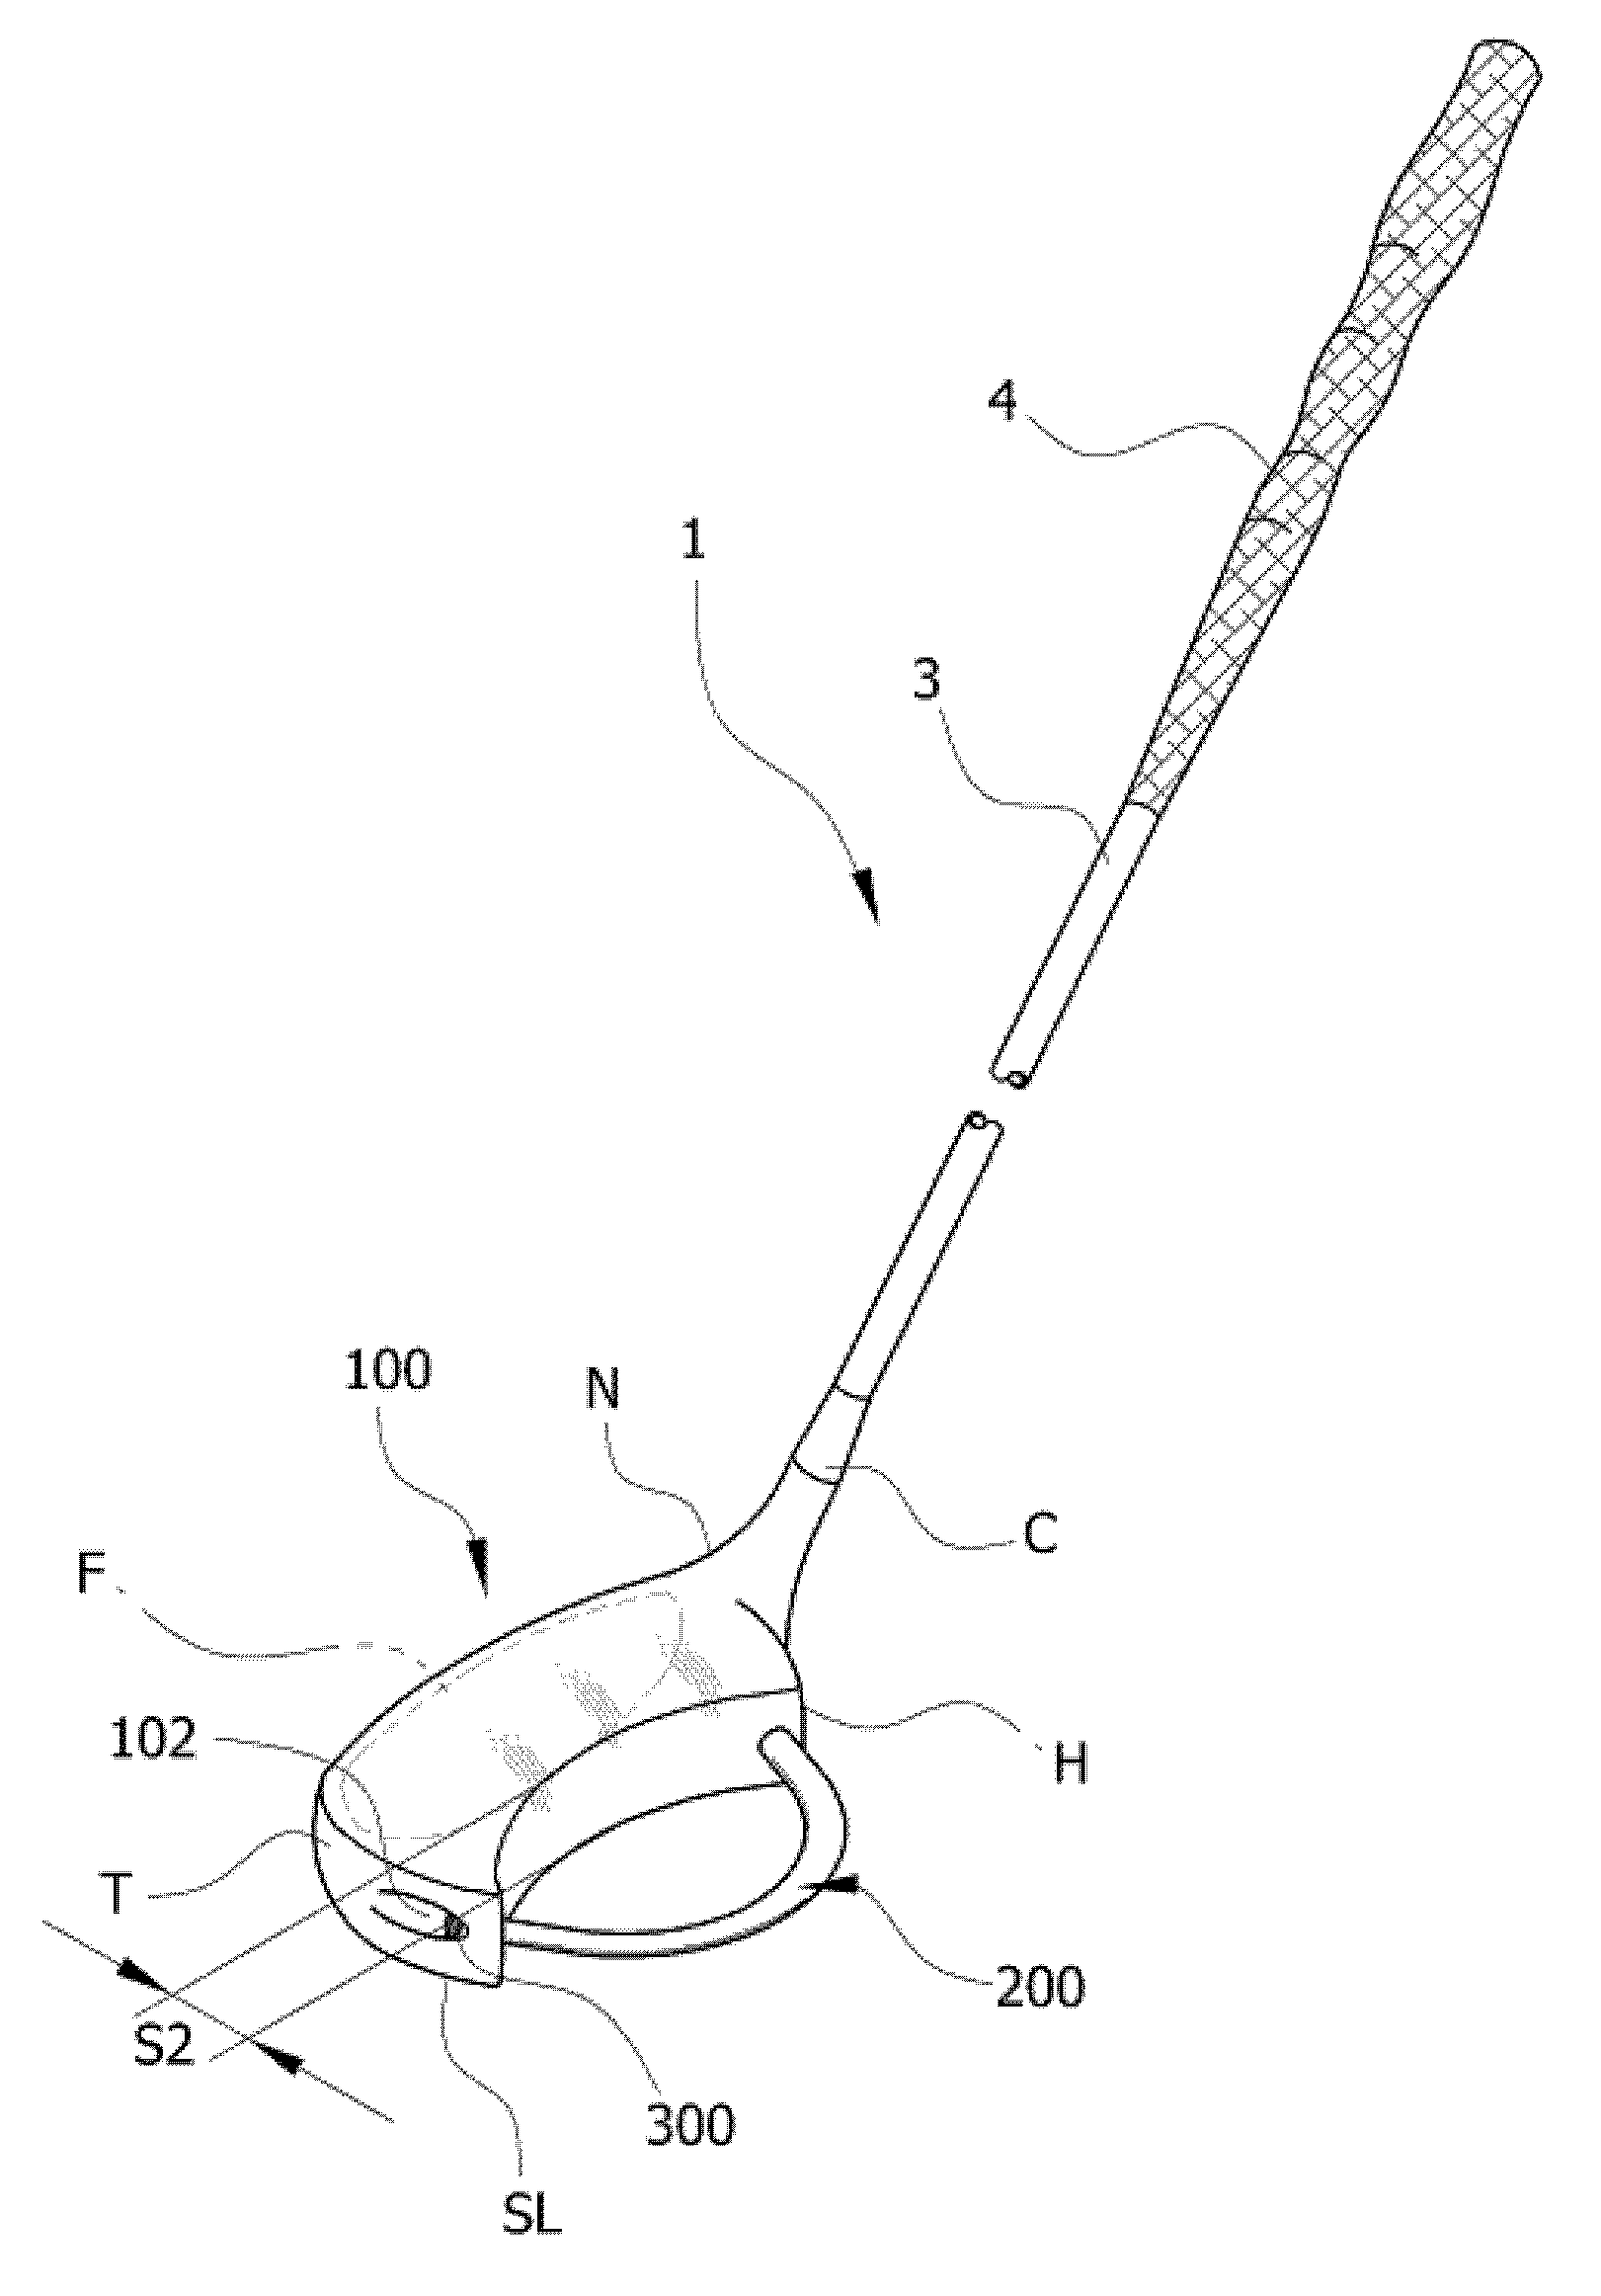 Golf club for preventing hook and slice